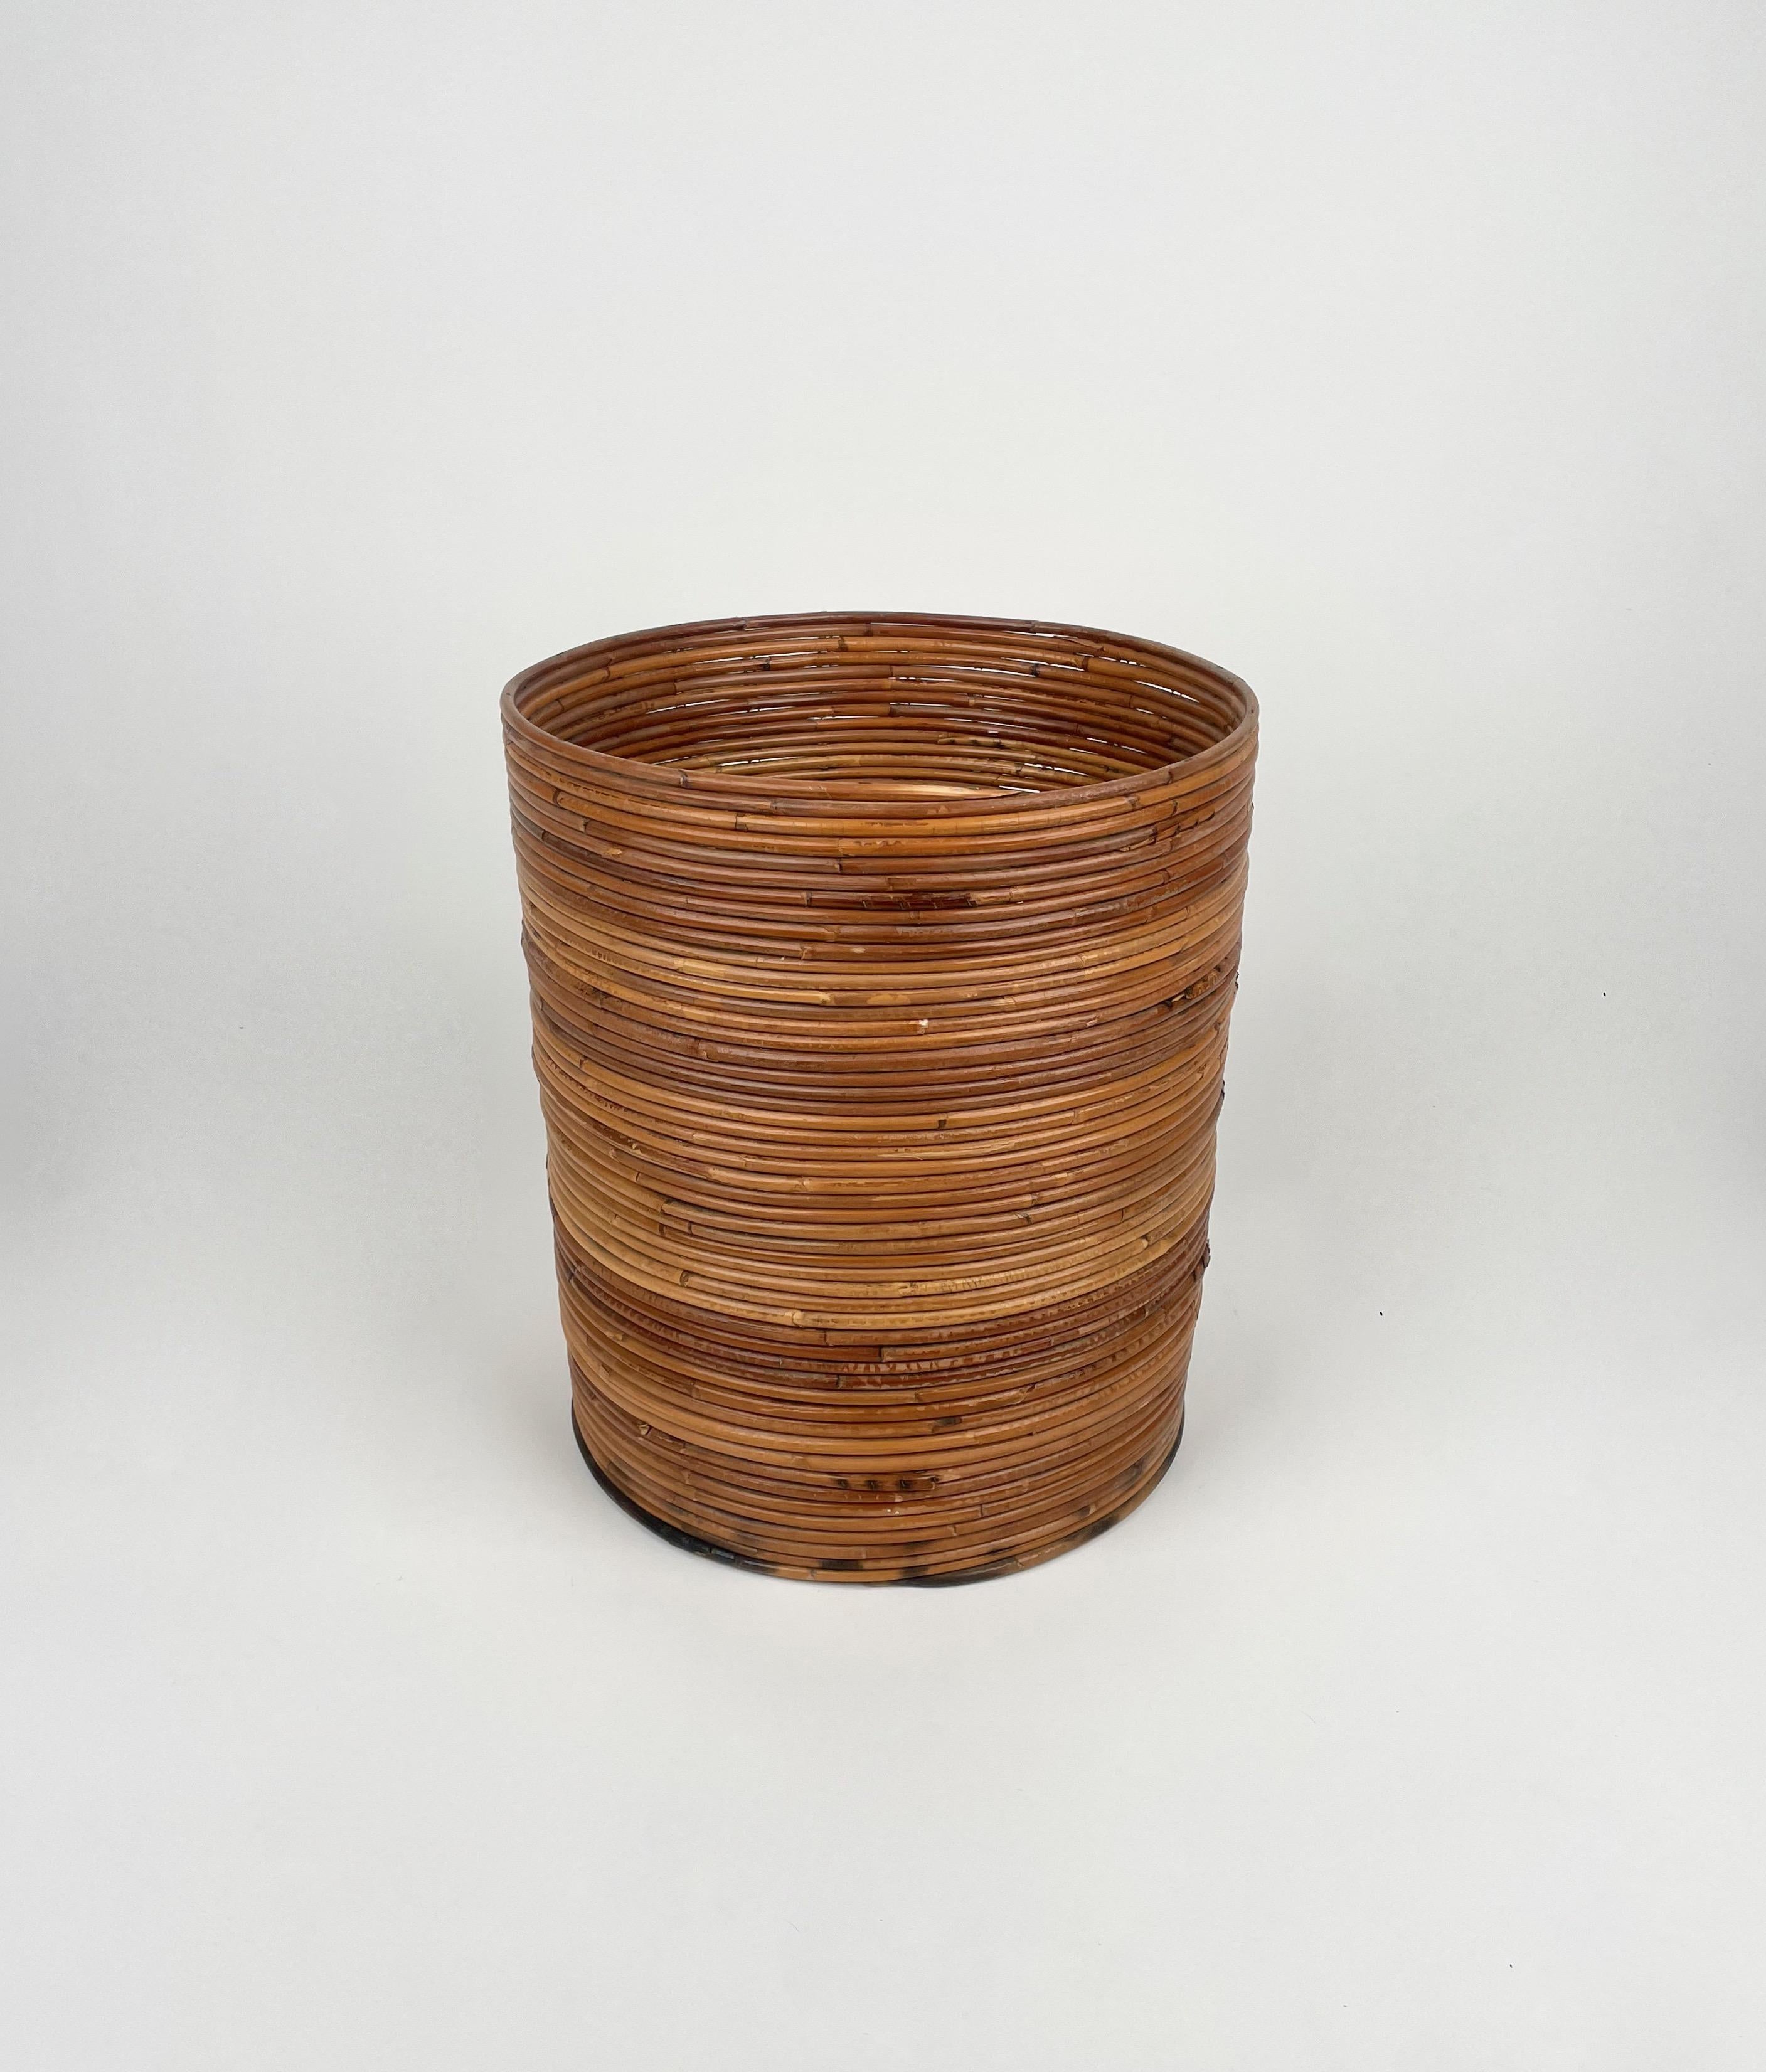 Mid-Century Modern Rattan and Bamboo Round Basket Plant Holder Vase, Italy, 1960s For Sale